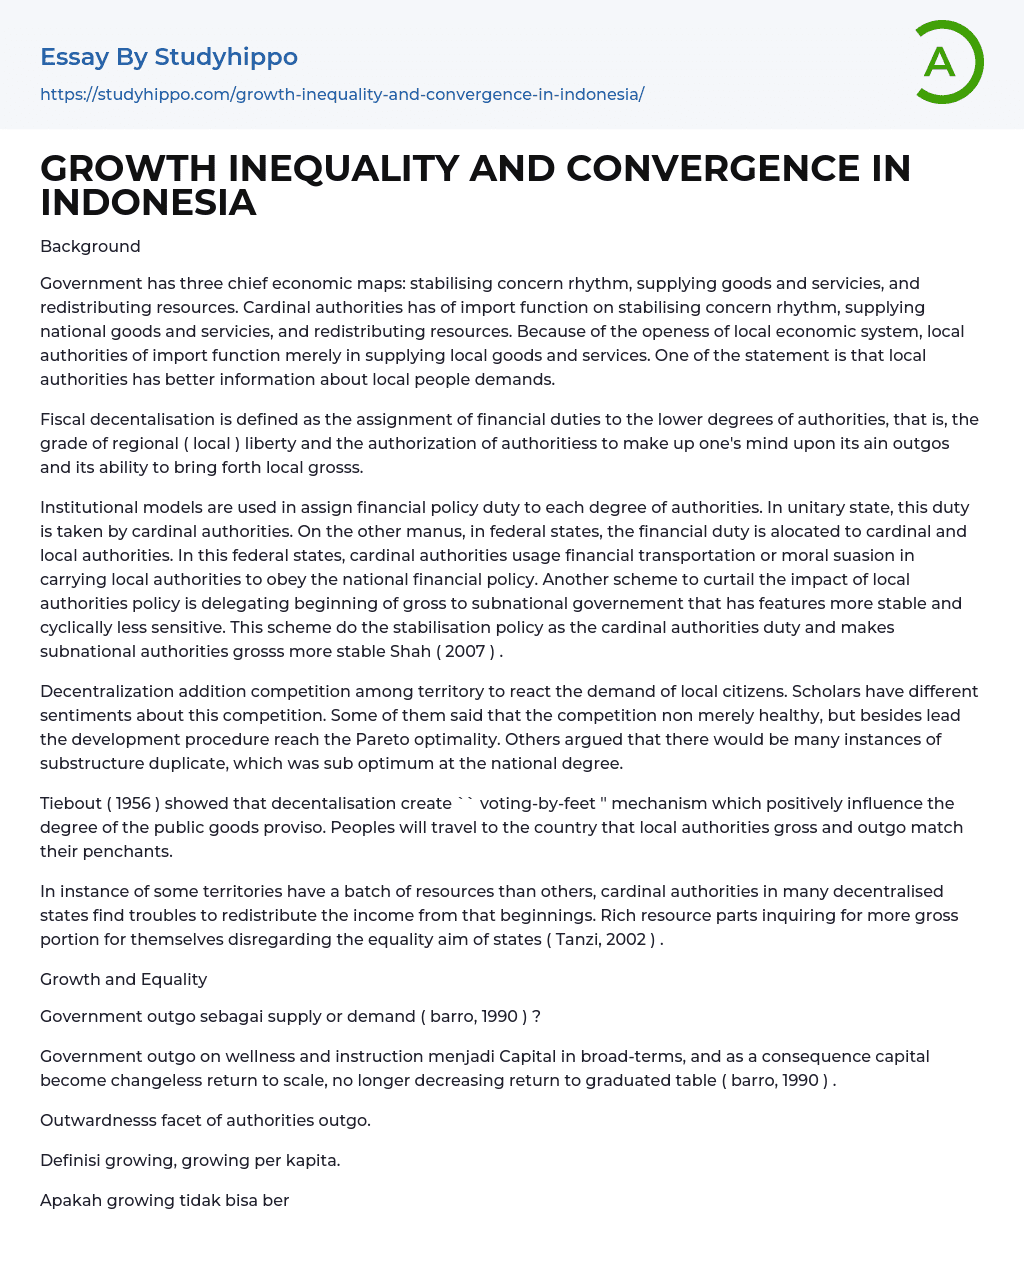 GROWTH INEQUALITY AND CONVERGENCE IN INDONESIA Essay Example